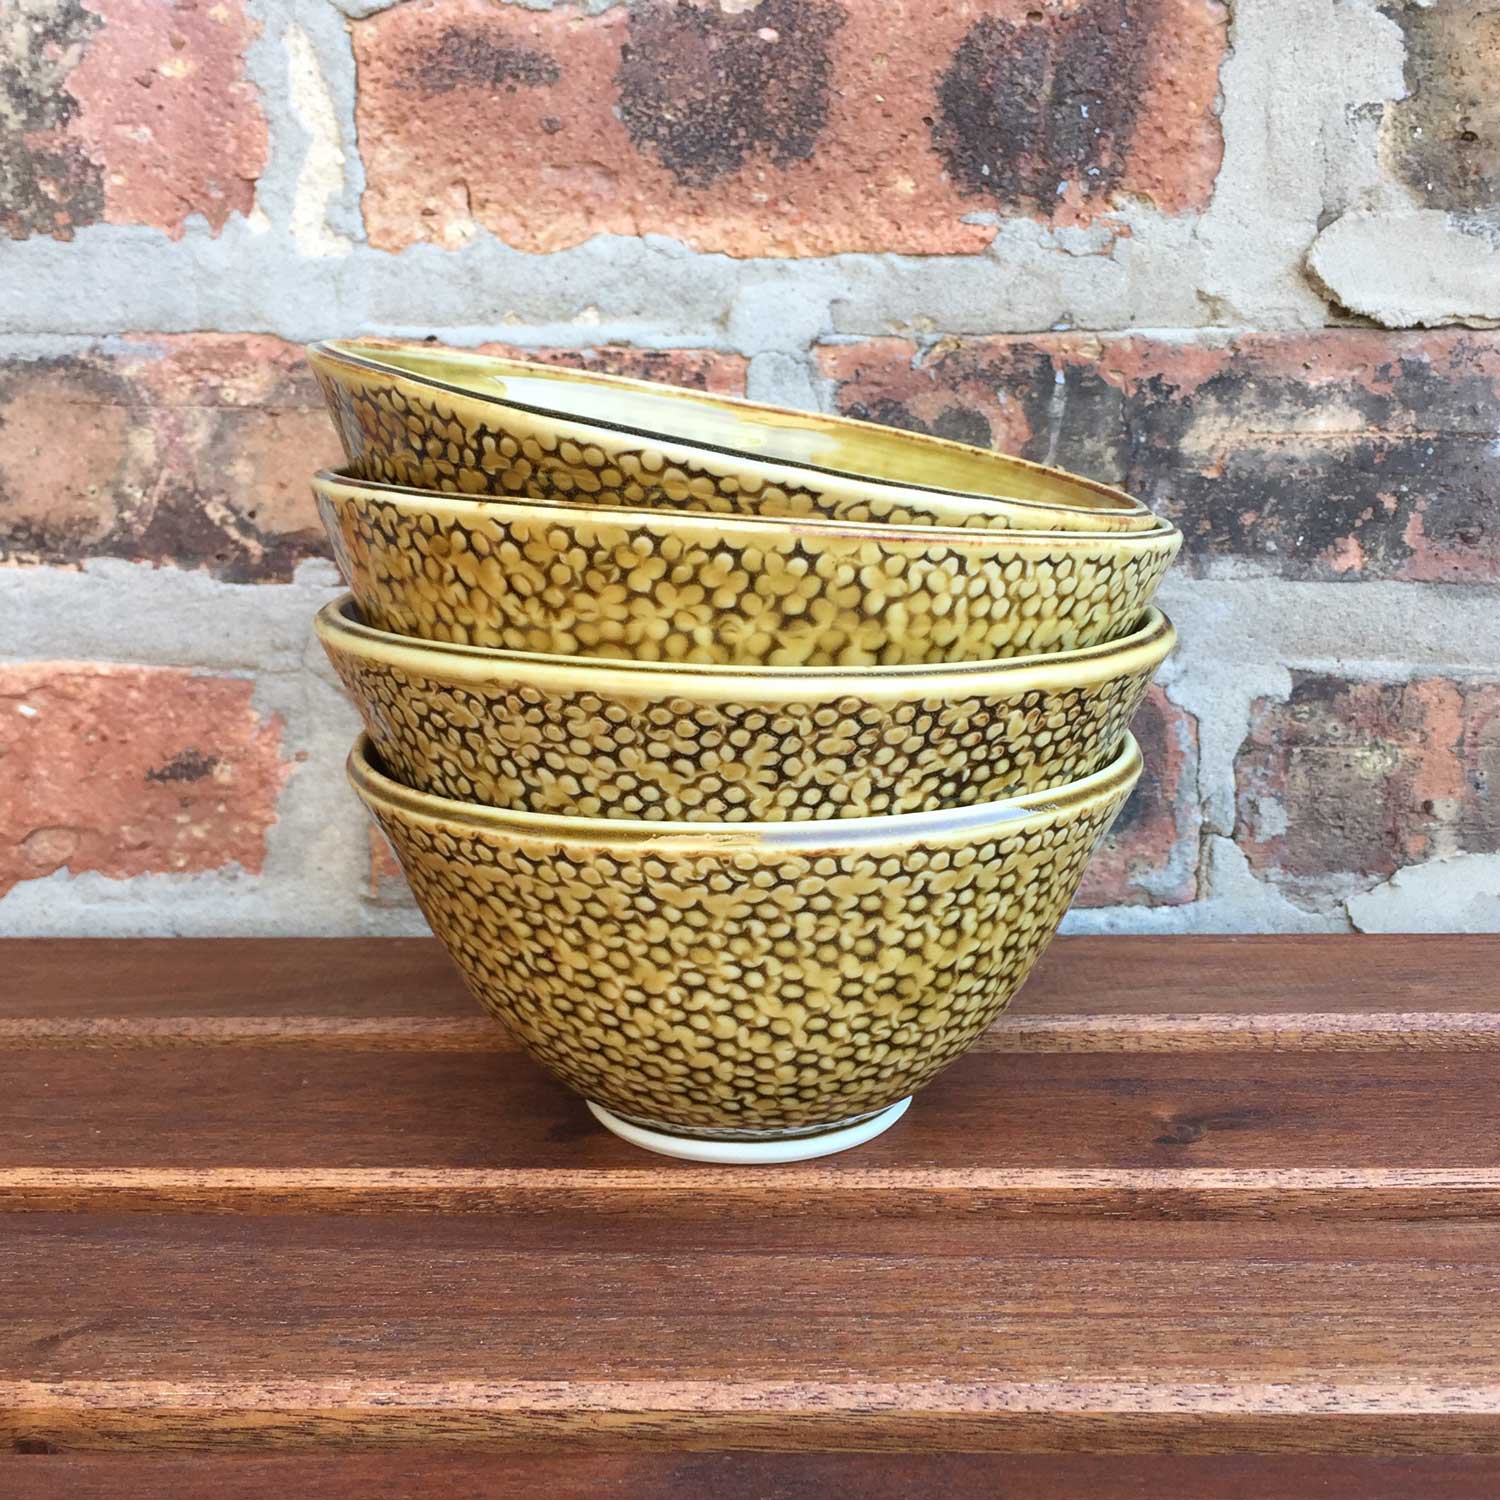 Clay: Stamped Bowls